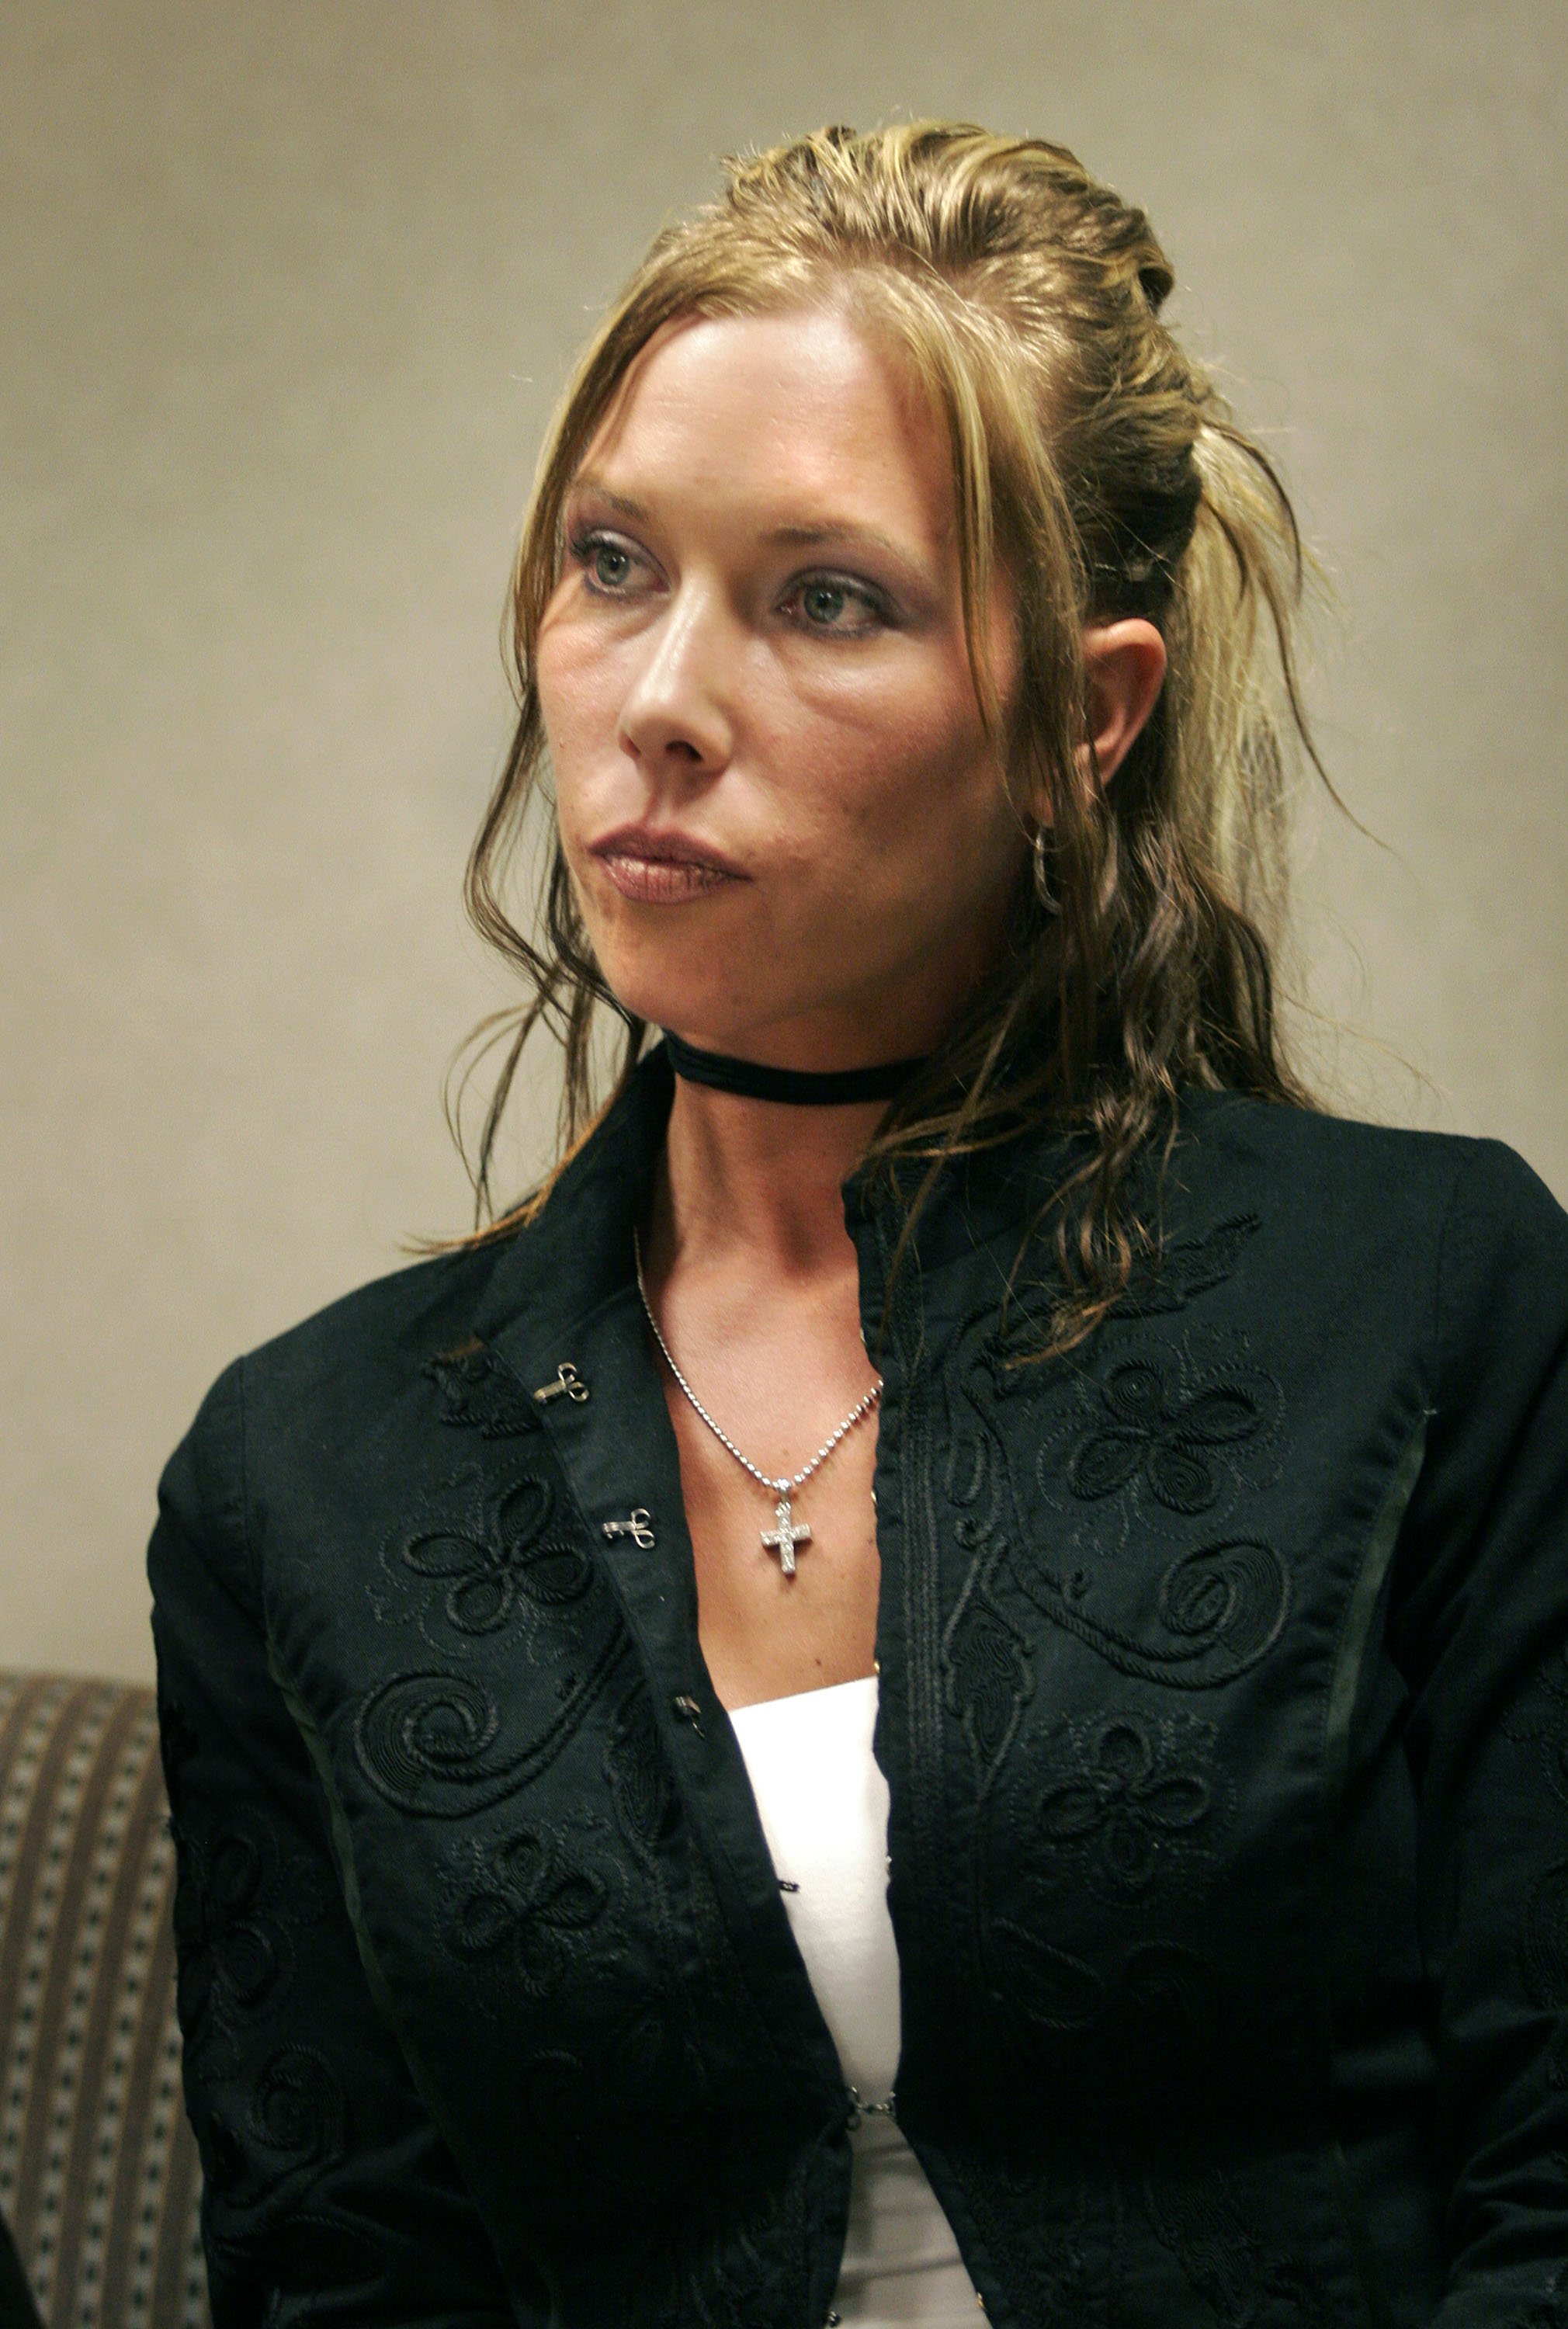 Kim Mathers is photographed as she appears in Macomb County Circuit Court on March 26, 2007, in Mt. Clemens, Michigan | Source: Getty Images